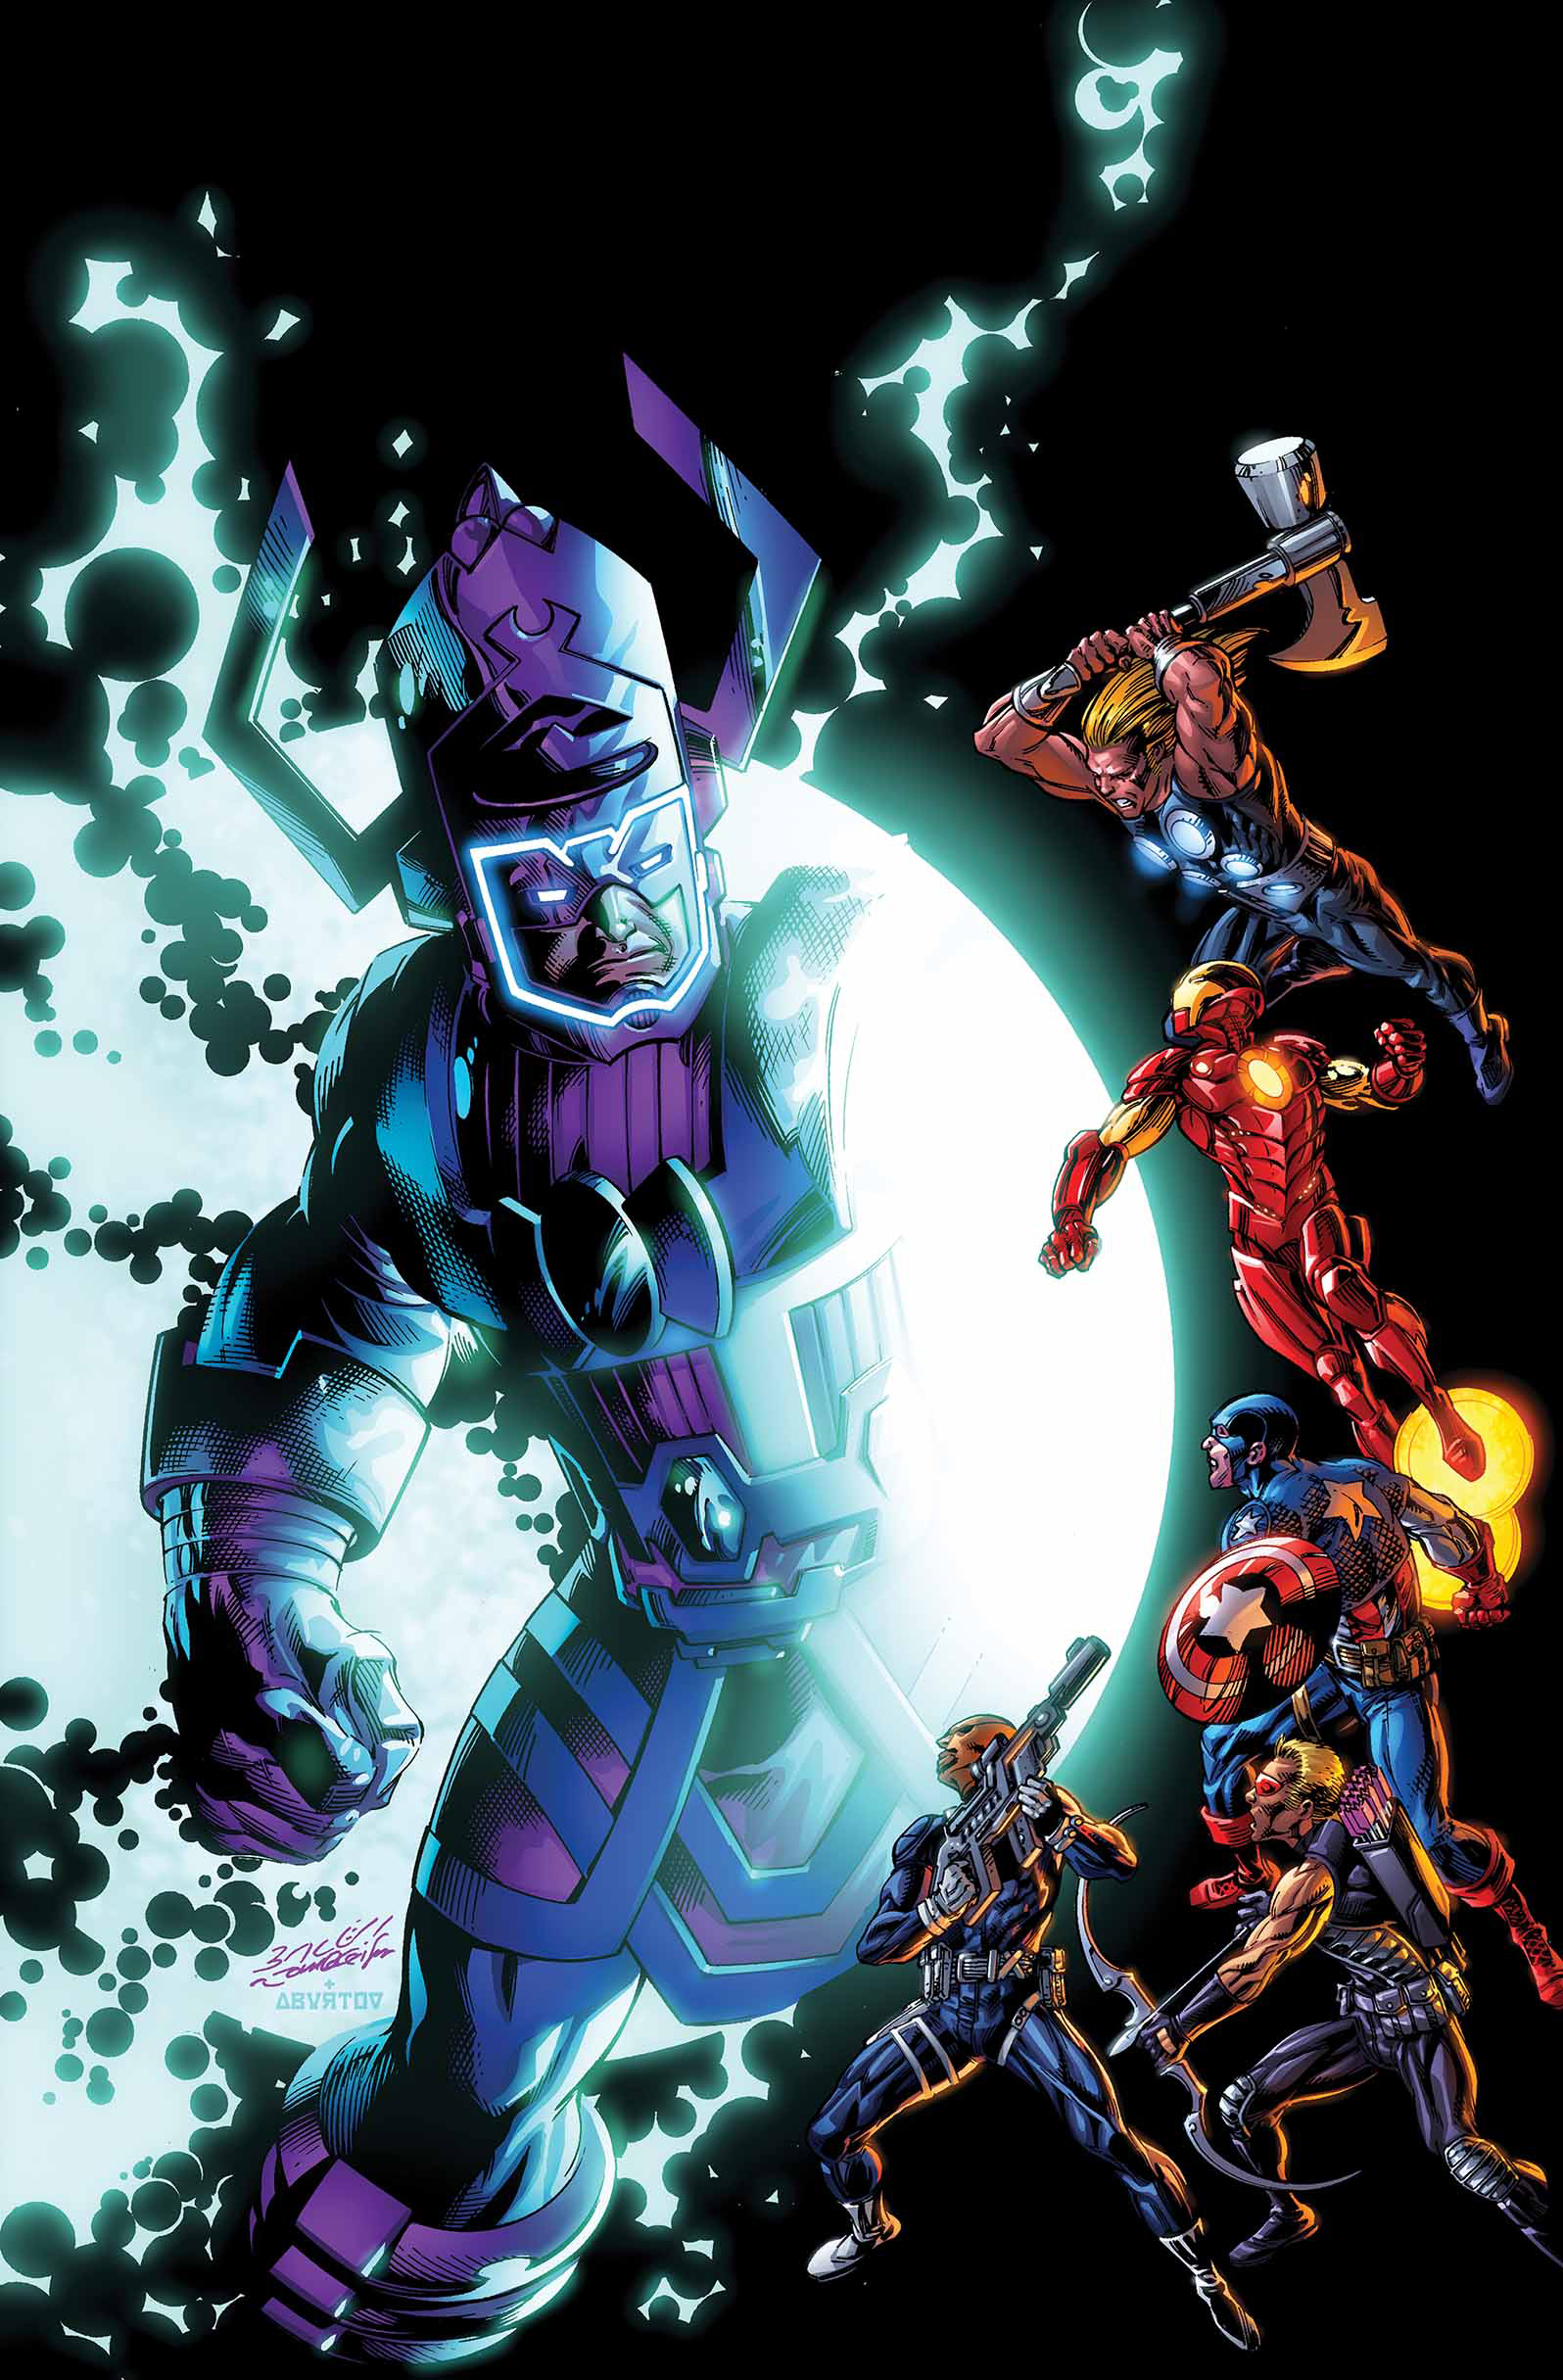 CATACLYSM ULTIMATES LAST STAND #1 (OF 5)